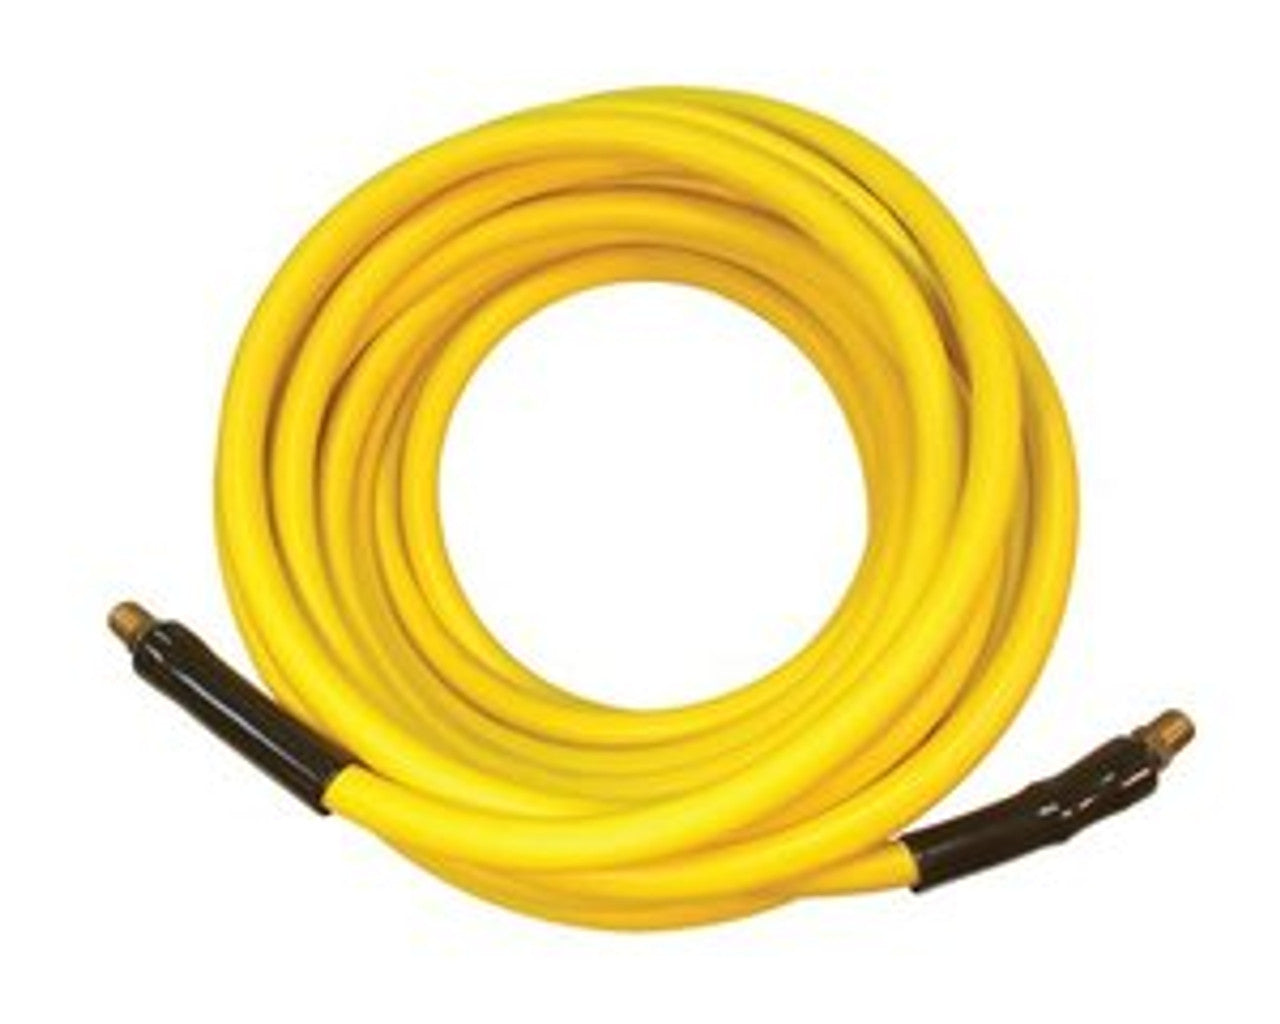 Legacy, Hose, Yellow, Smooth, Non Marking, 3/8" X 100', 1 Wire, Up to 3000PSI, 8.901-804.0